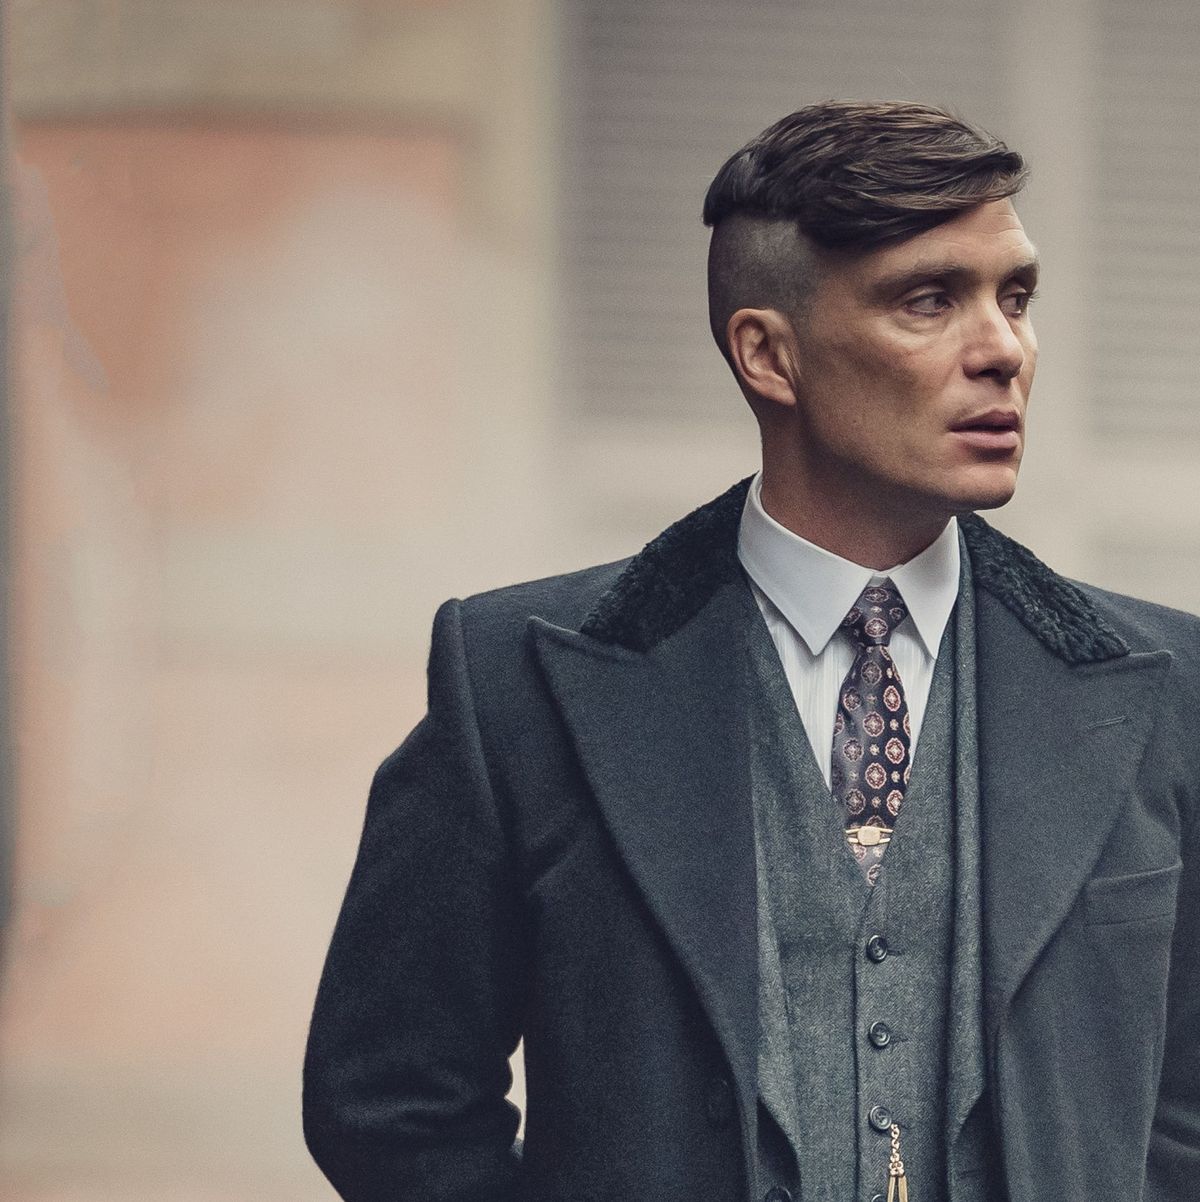 https://hips.hearstapps.com/hmg-prod/images/tommy-shelby-cillian-murphy-peaky-blinders-1569234705.jpg?crop=0.737xw:0.492xh;0.263xw,0&resize=1200:*